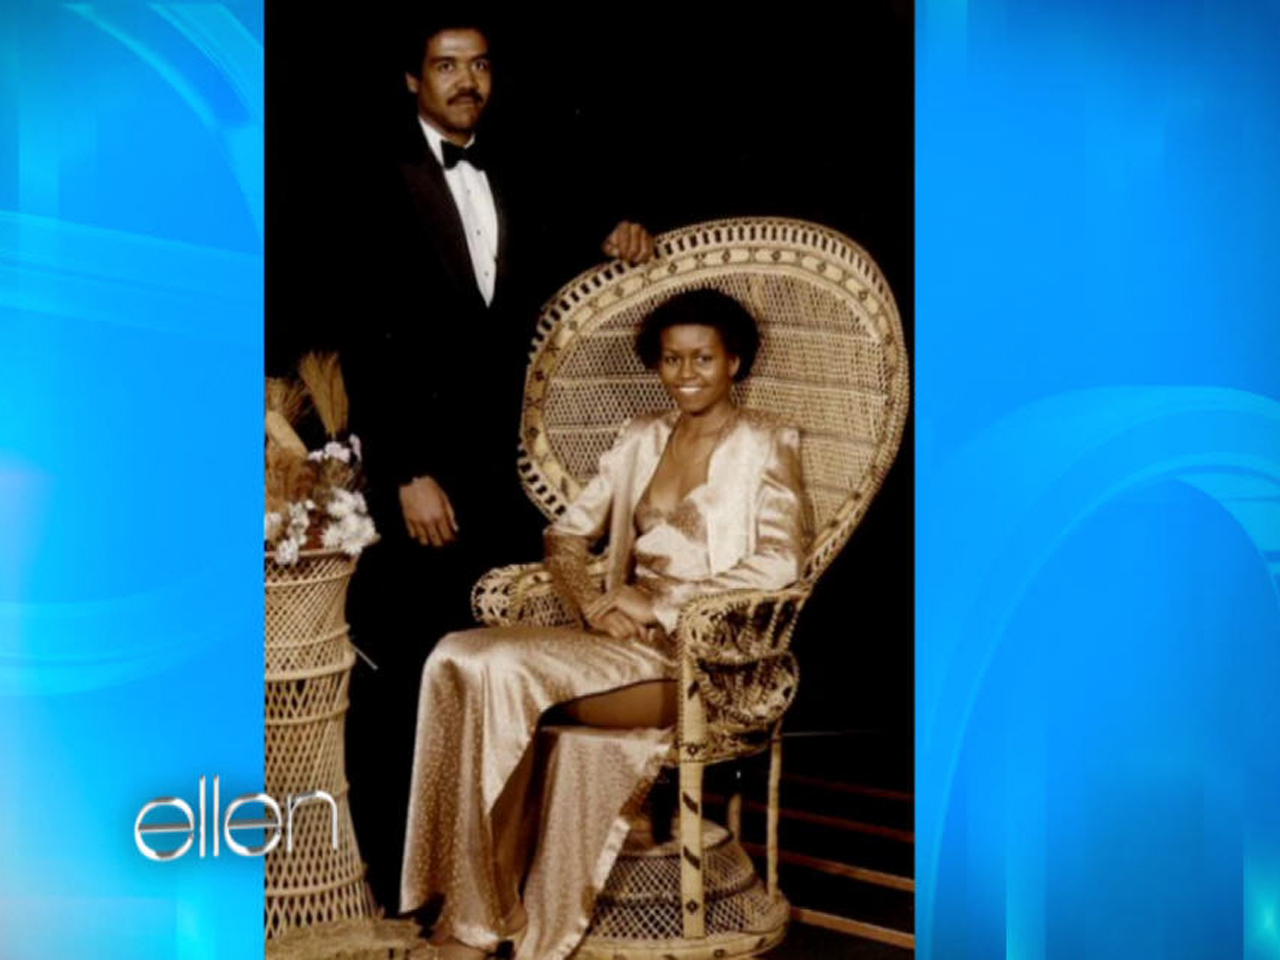 Michelle Obama S Prom Photo Revealed On The Ellen